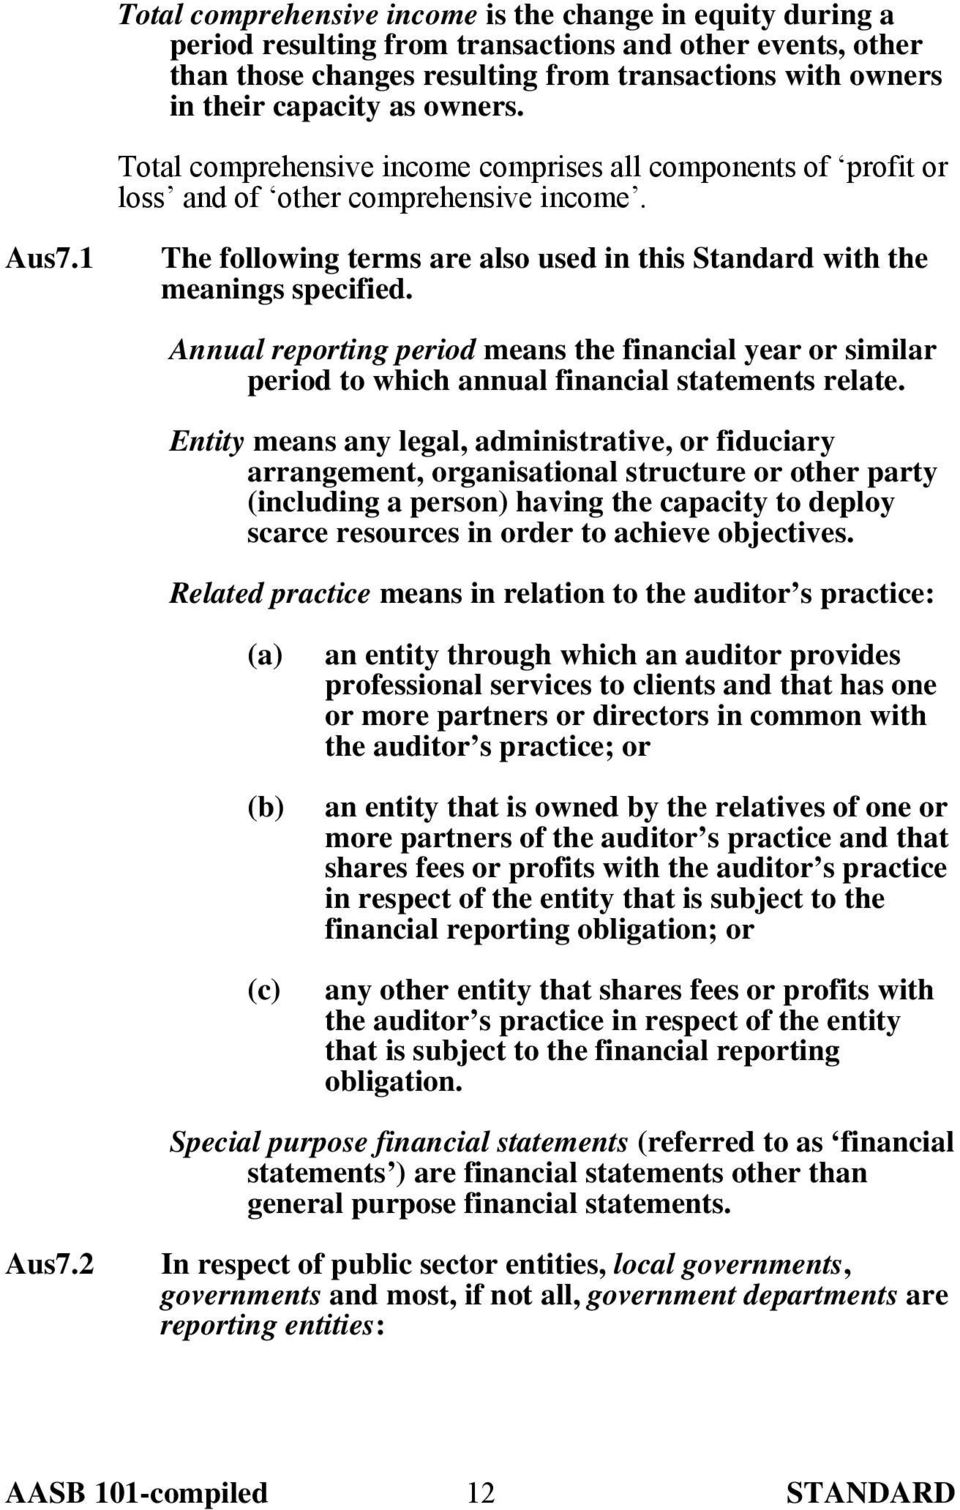 Annual reporting period means the financial year or similar period to which annual financial statements relate.